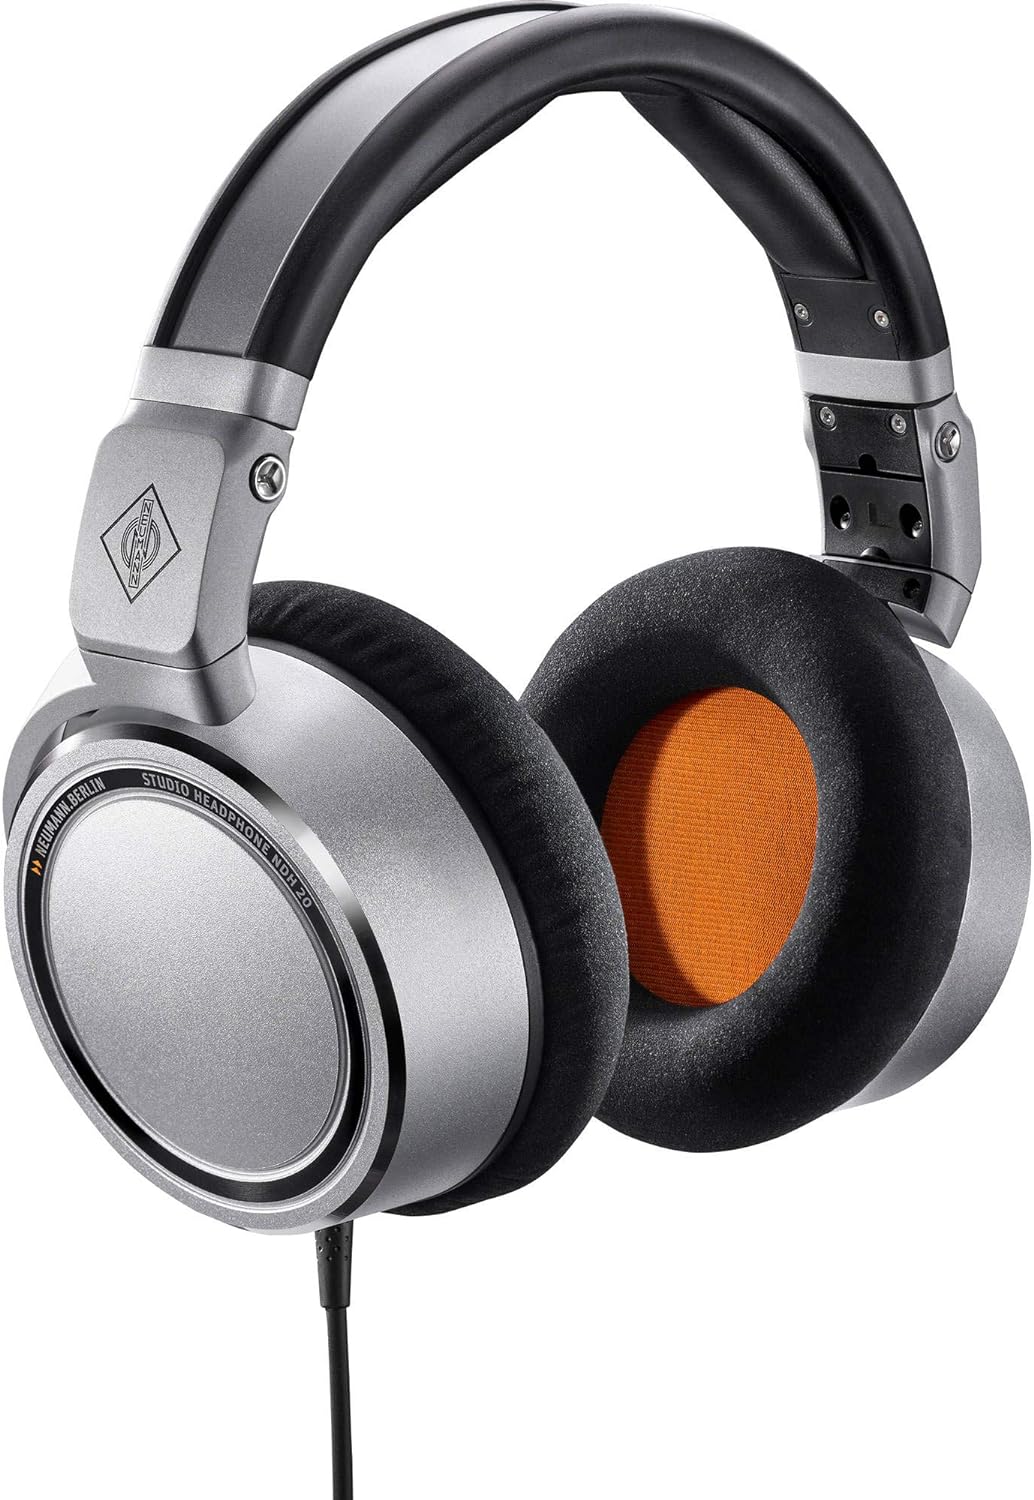 Neumann NDH 20 Closed Back Monitoring Professional Studio Headphones Gaming, Mixing, Mastering, Video or Audio Production, 3M straight cable w 1’8” stereo connector and 1/4” adaptor, Nickle, Large